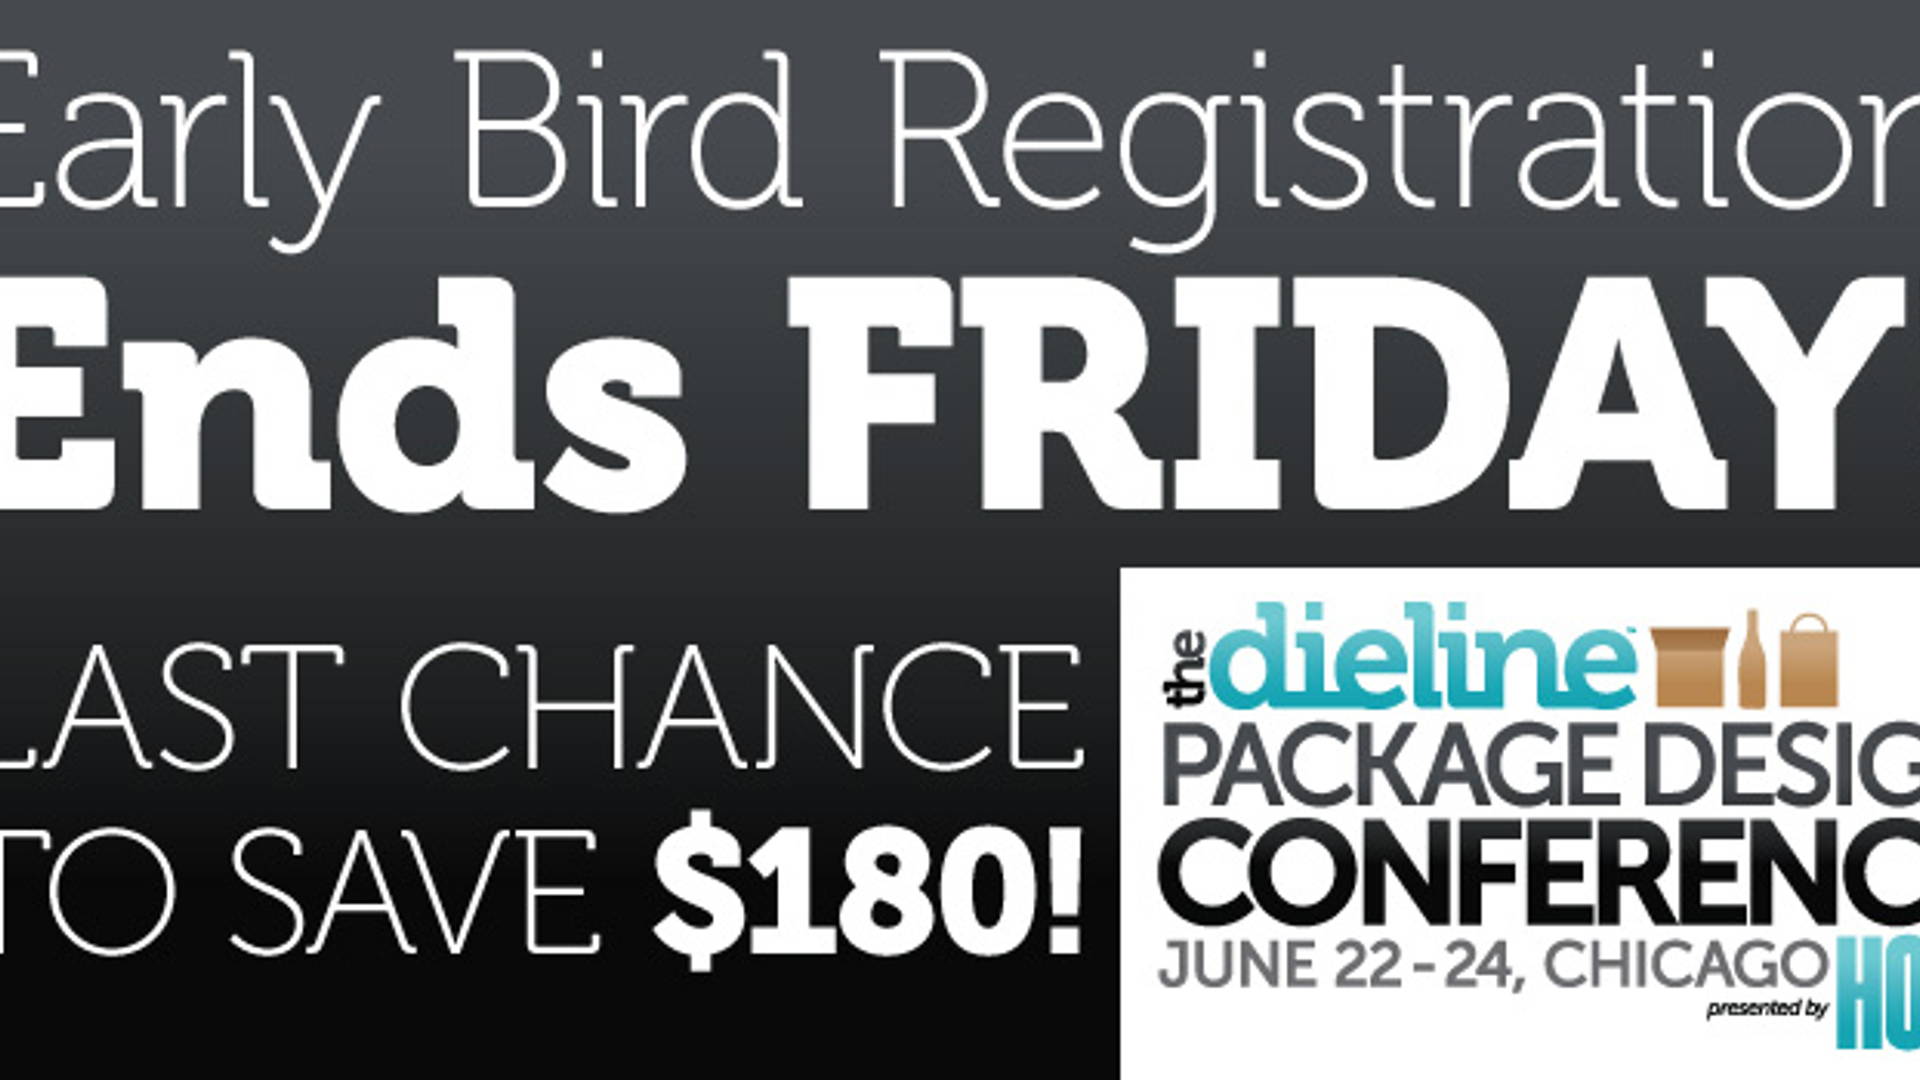 Featured image for Early Bird Registration Ends Friday!